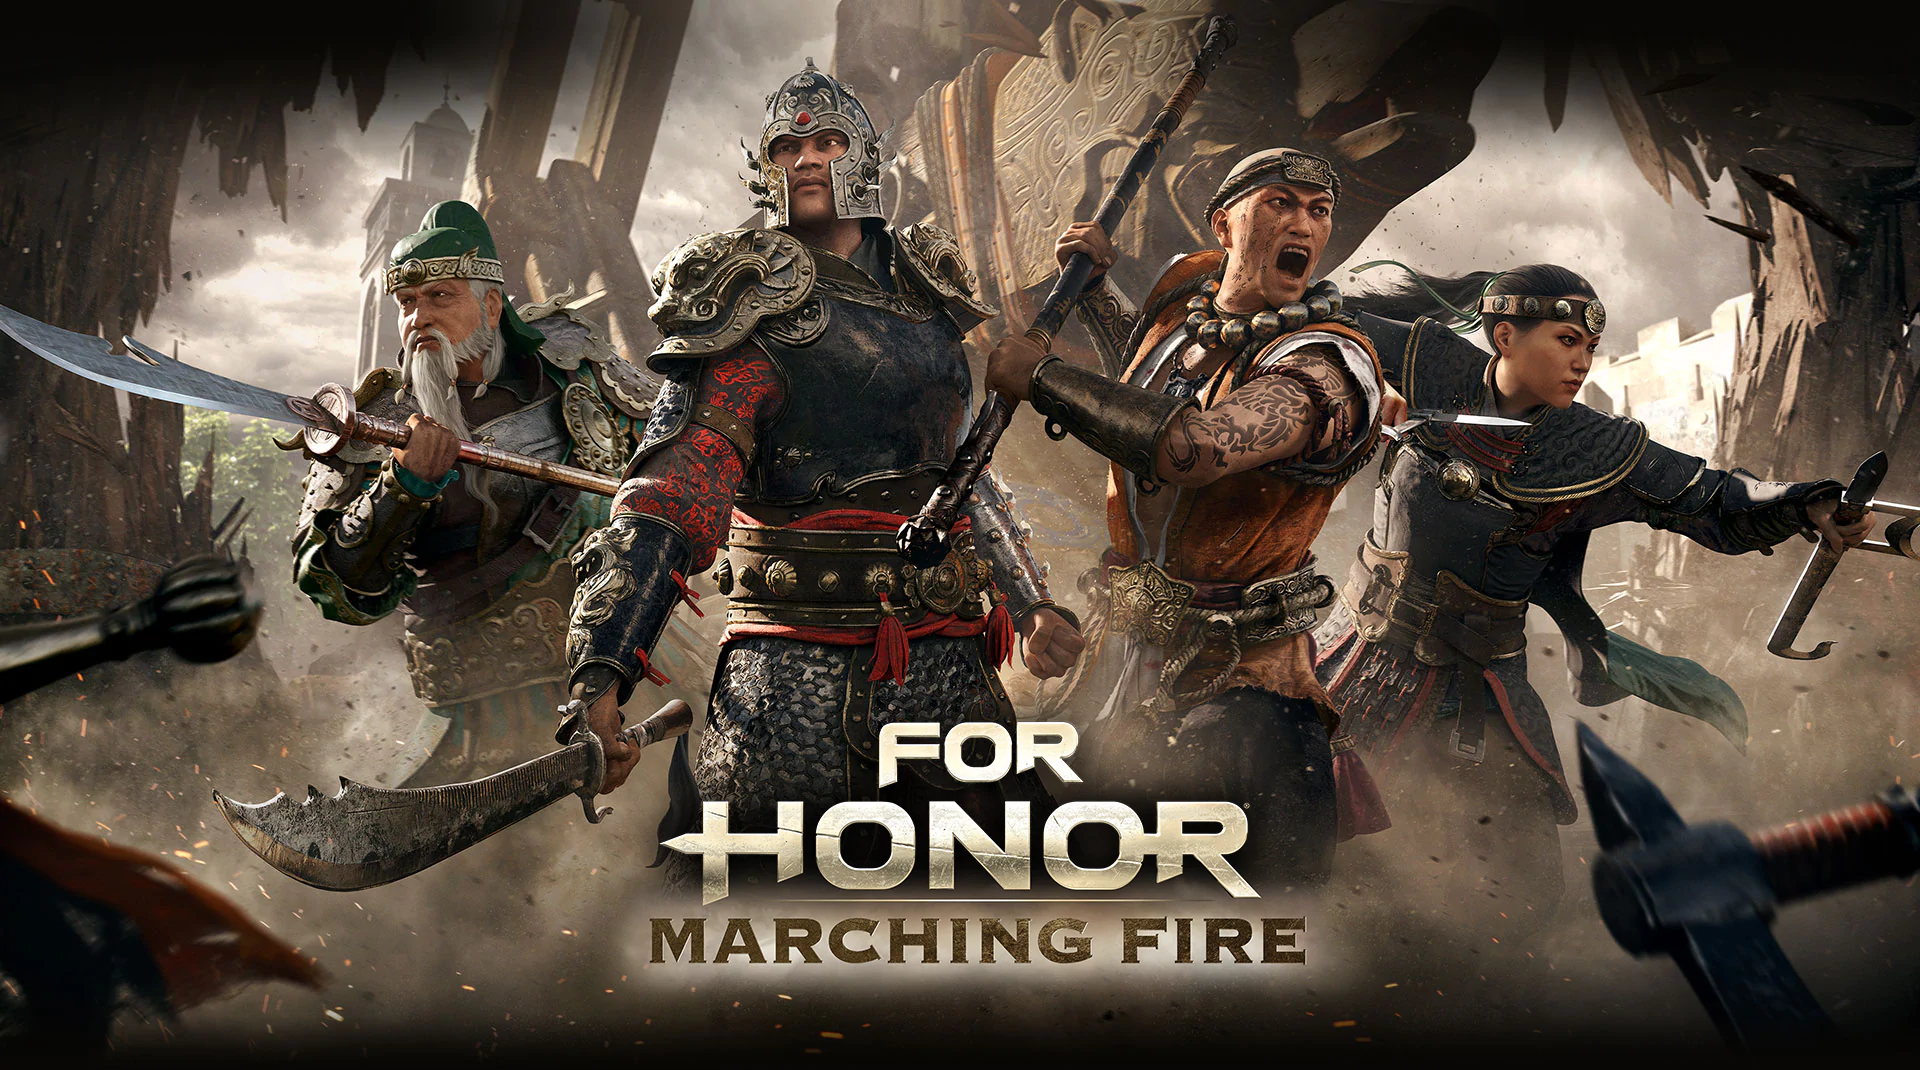 For Honor Maching Fire Wallpapers